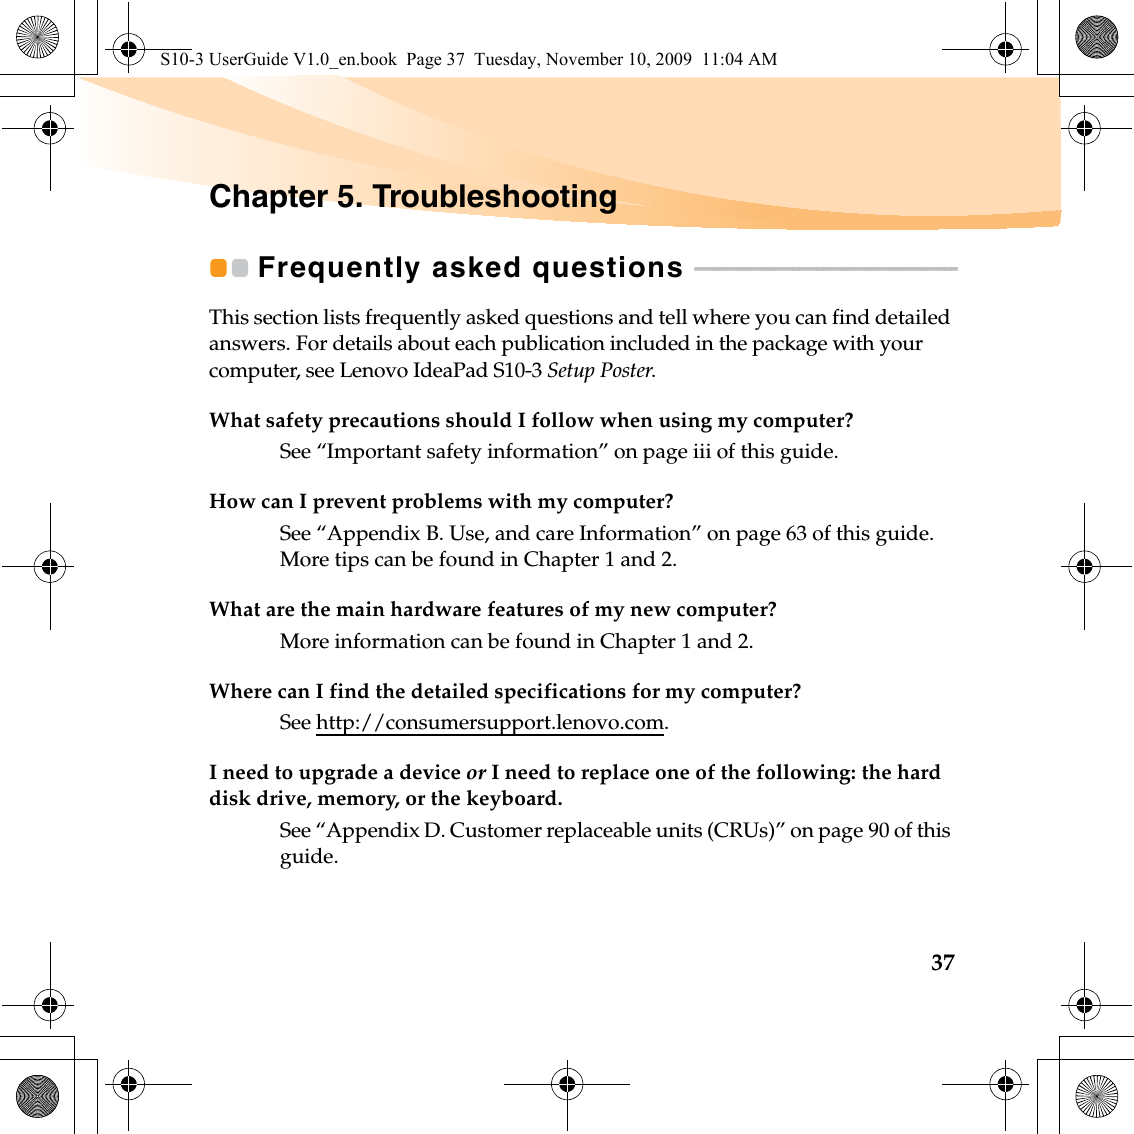 37Chapter 5. TroubleshootingFrequently asked questions  - - - - - - - - - - - - - - - - - - - - - - - - - - - - - - - - - - - - - - - - - - -This section lists frequently asked questions and tell where you can find detailed answers. For details about each publication included in the package with your computer, see Lenovo IdeaPad S10-3 Setup Poster.What safety precautions should I follow when using my computer?See “Important safety information” on page iii of this guide.How can I prevent problems with my computer?See “Appendix B. Use, and care Information” on page 63 of this guide. More tips can be found in Chapter 1 and 2.What are the main hardware features of my new computer?More information can be found in Chapter 1 and 2.Where can I find the detailed specifications for my computer?See http://consumersupport.lenovo.com.I need to upgrade a device or I need to replace one of the following: the hard disk drive, memory, or the keyboard.See “Appendix D. Customer replaceable units (CRUs)” on page 90 of this guide.S10-3 UserGuide V1.0_en.book  Page 37  Tuesday, November 10, 2009  11:04 AM